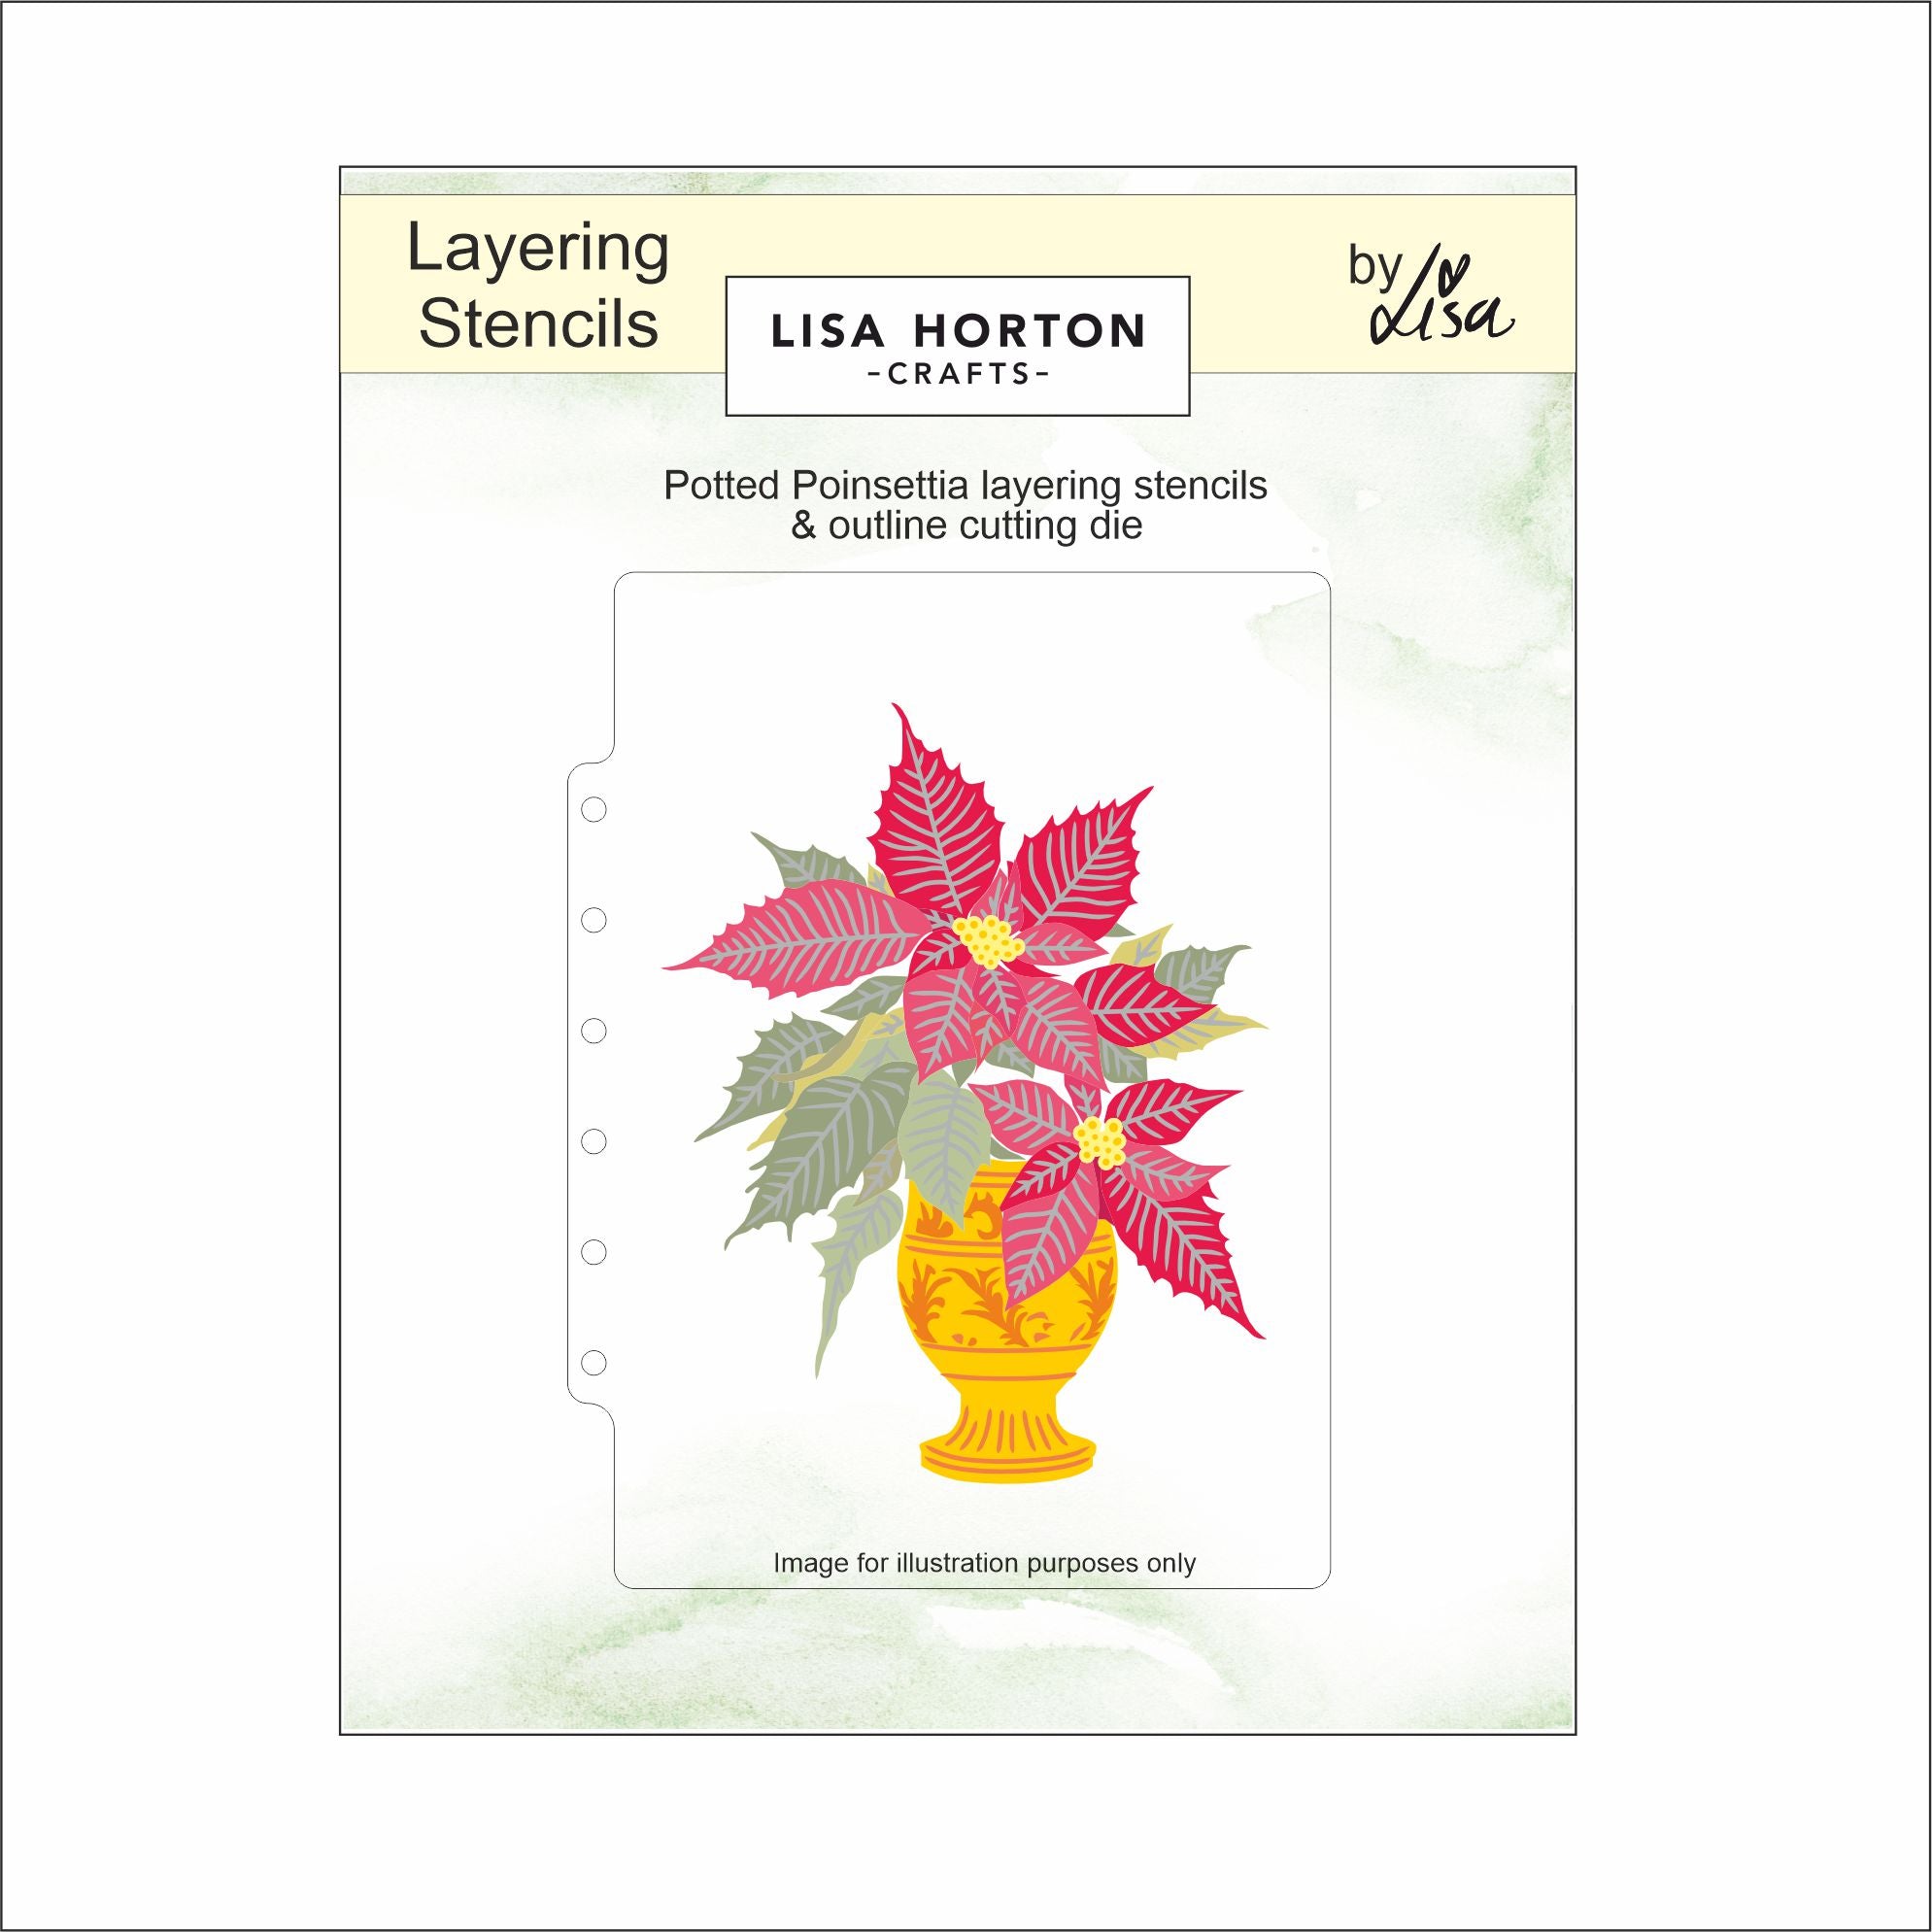 Lisa Horton Crafts Potted Poinsettia 5" x 7" Layering Stencils & Die